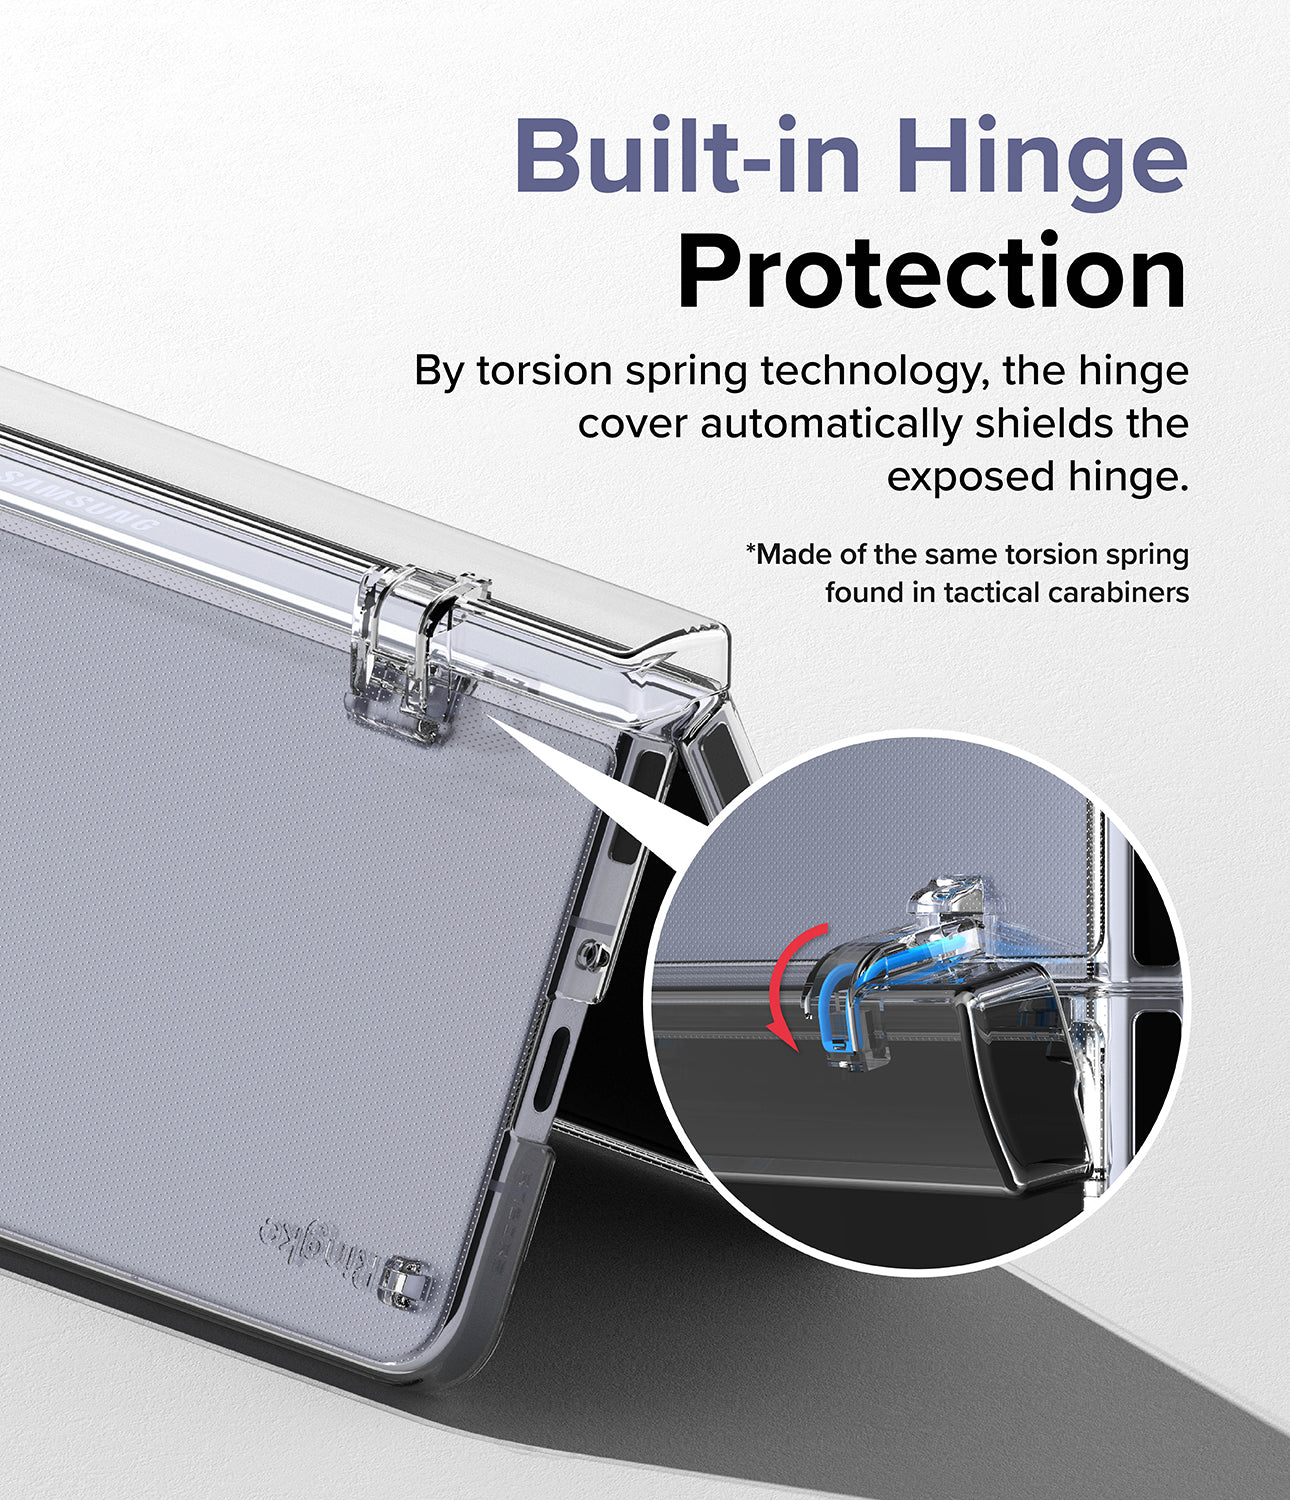 Galaxy Z Fold 5 Case | Slim Hinge - Built-in Hinge Protection. By torsion spring technology, the hinge cover automatically shields the exposed hinge. Made of the same torsion spring found in tactical carabiners.